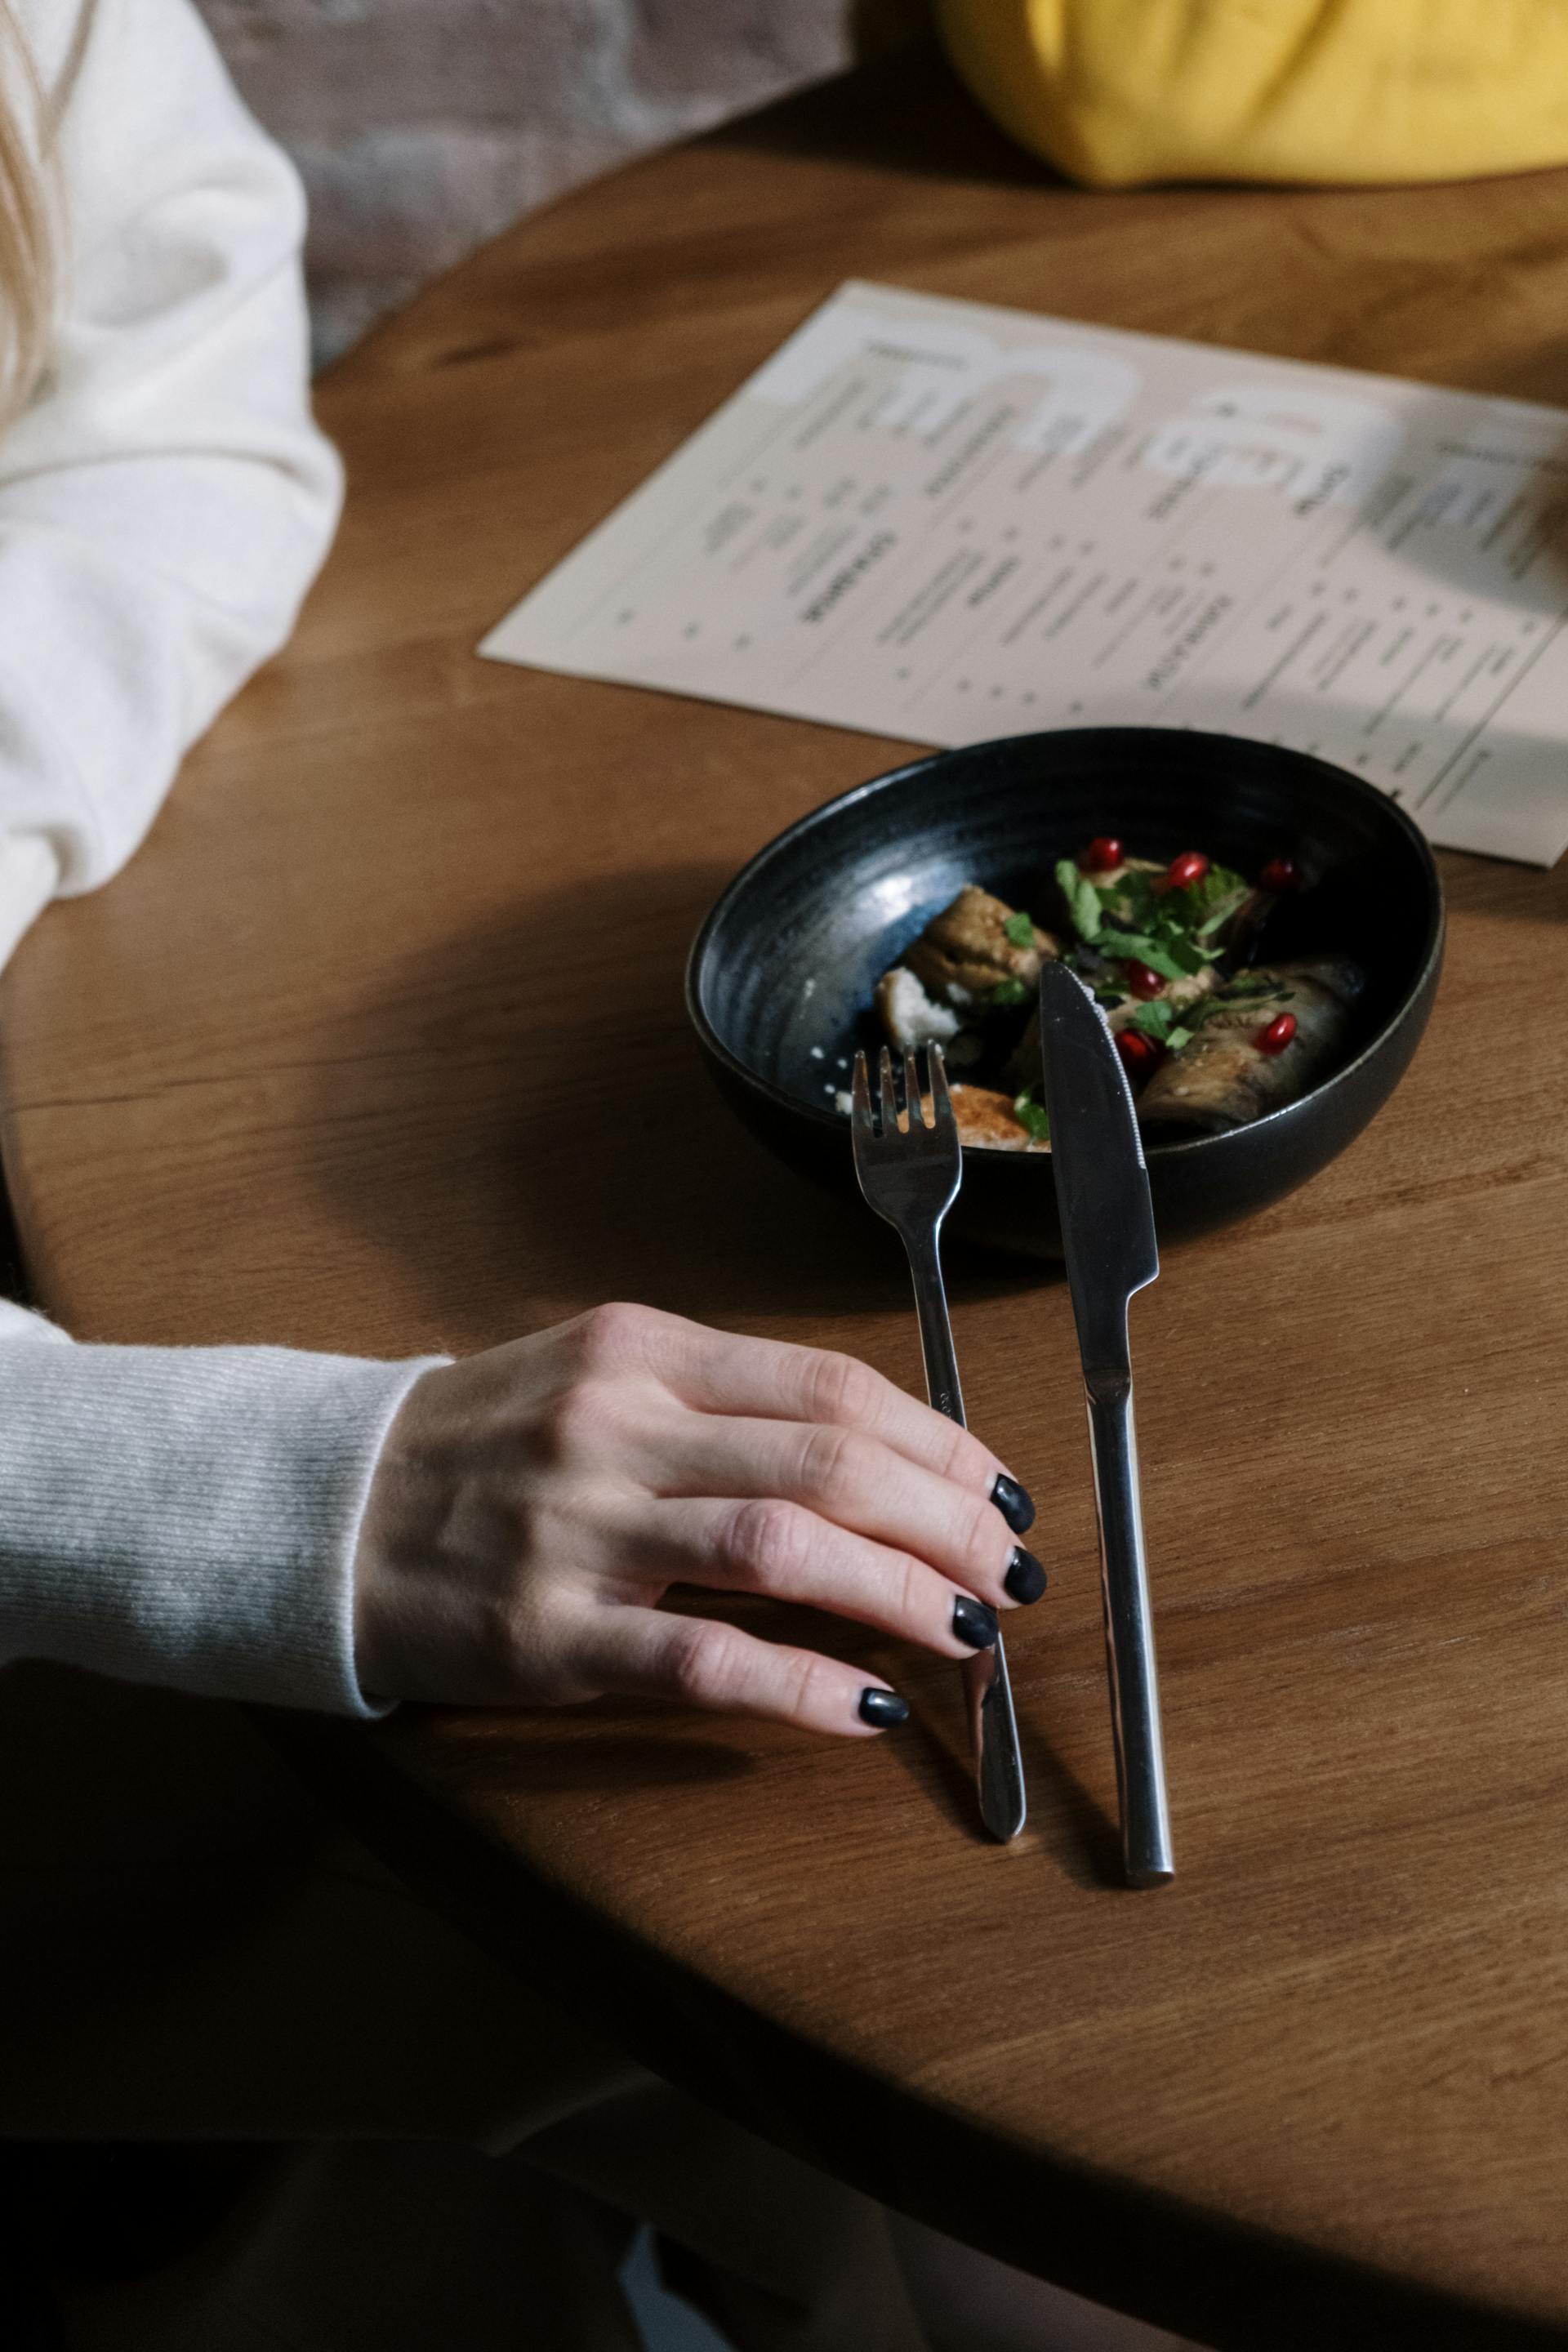 A woman holding a fork | Source: Pexels